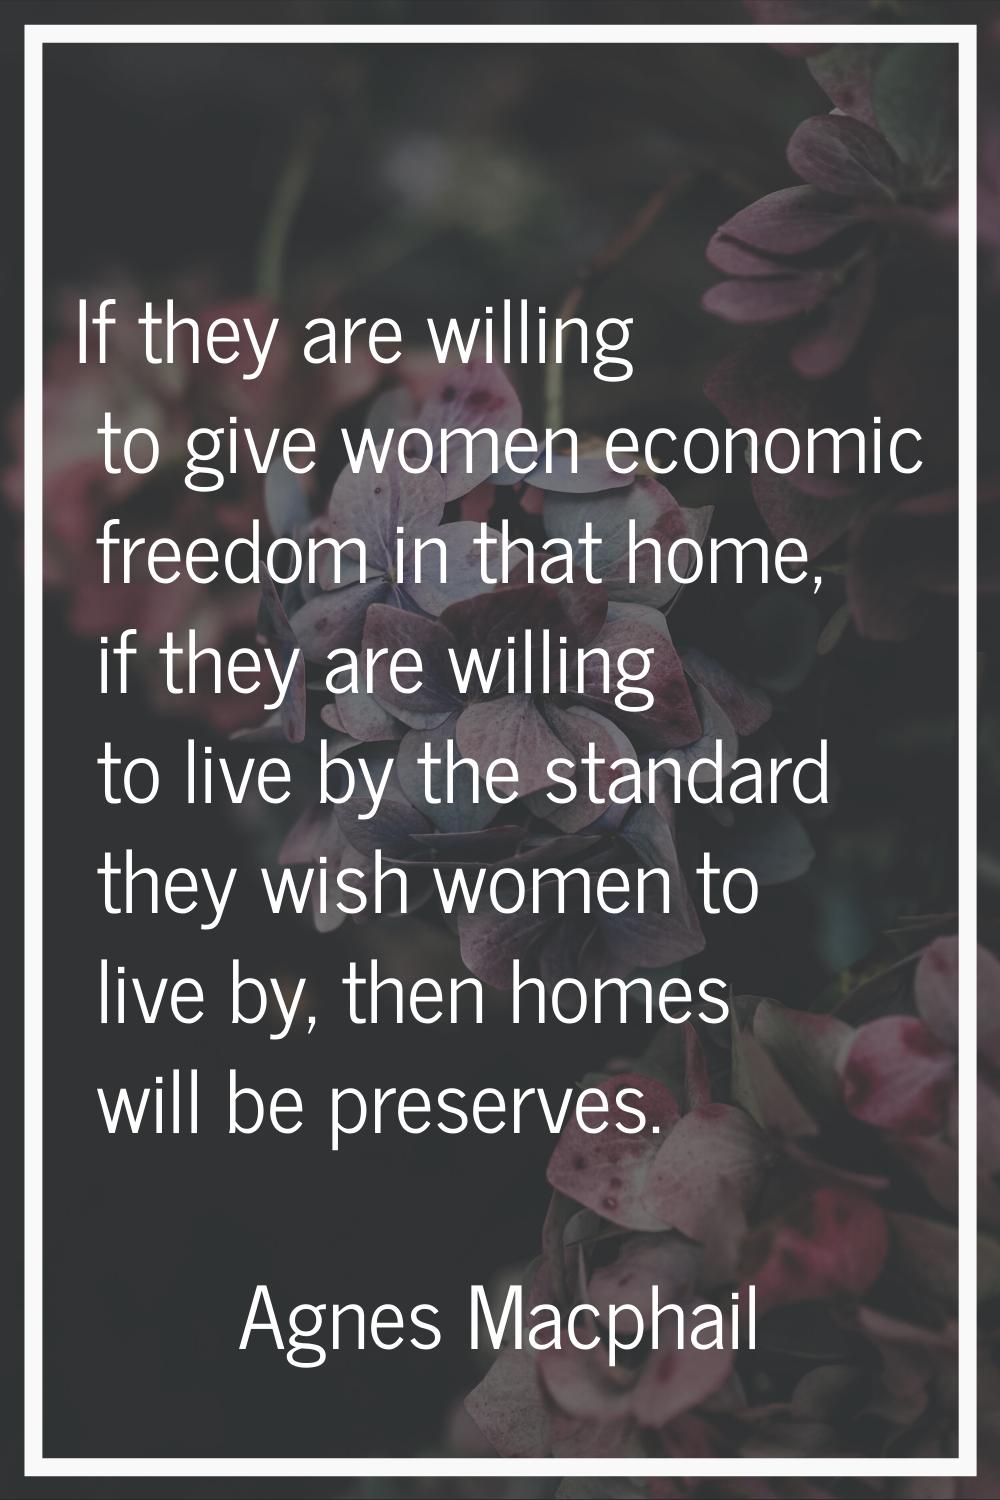 If they are willing to give women economic freedom in that home, if they are willing to live by the